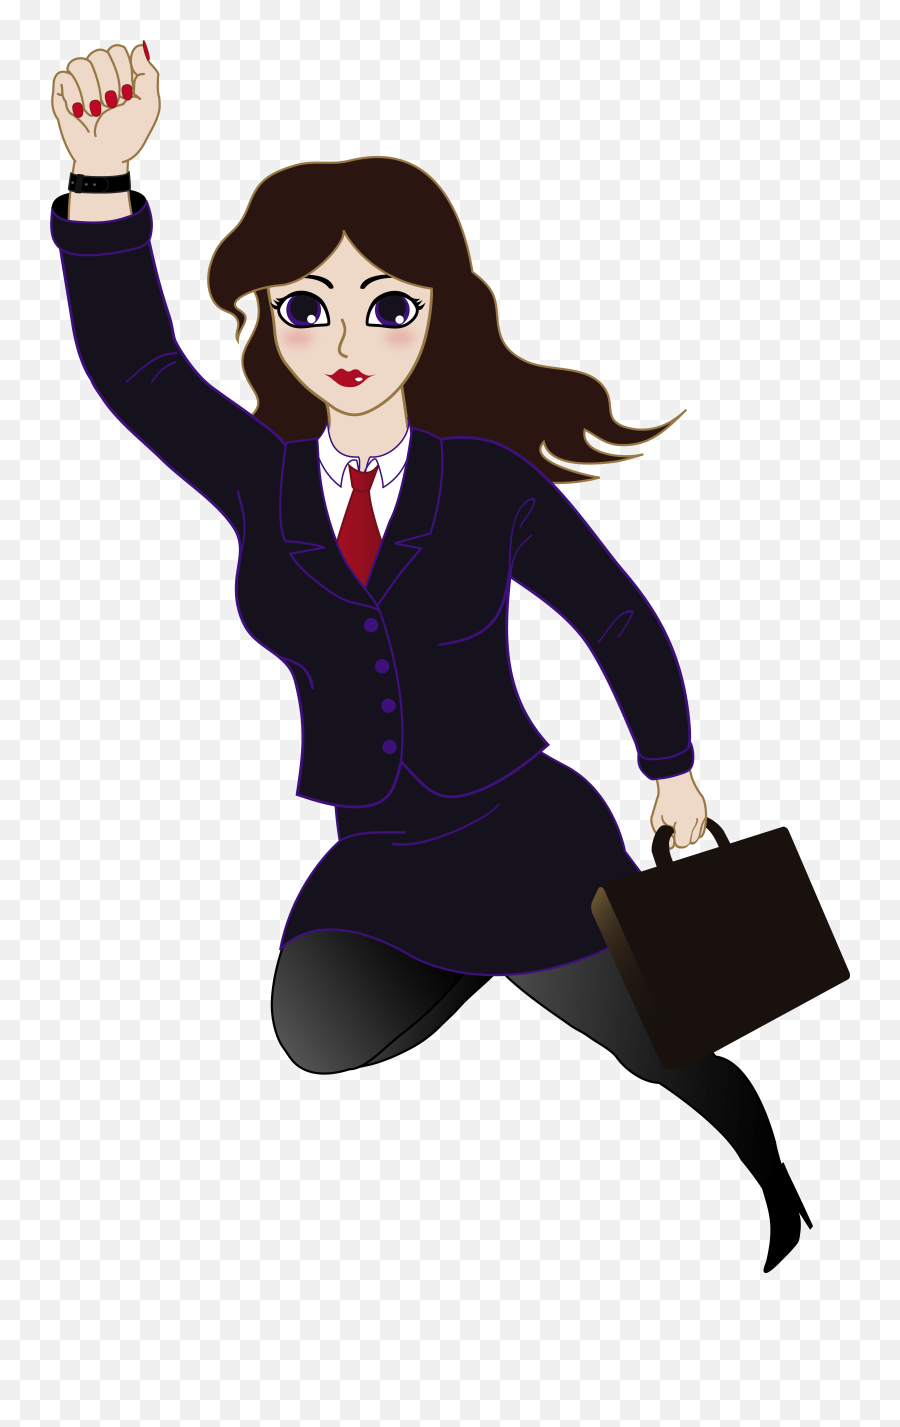 Free Clipart For Business Use - Professional Woman Career Woman Cartoon Emoji,Businessman Emoji